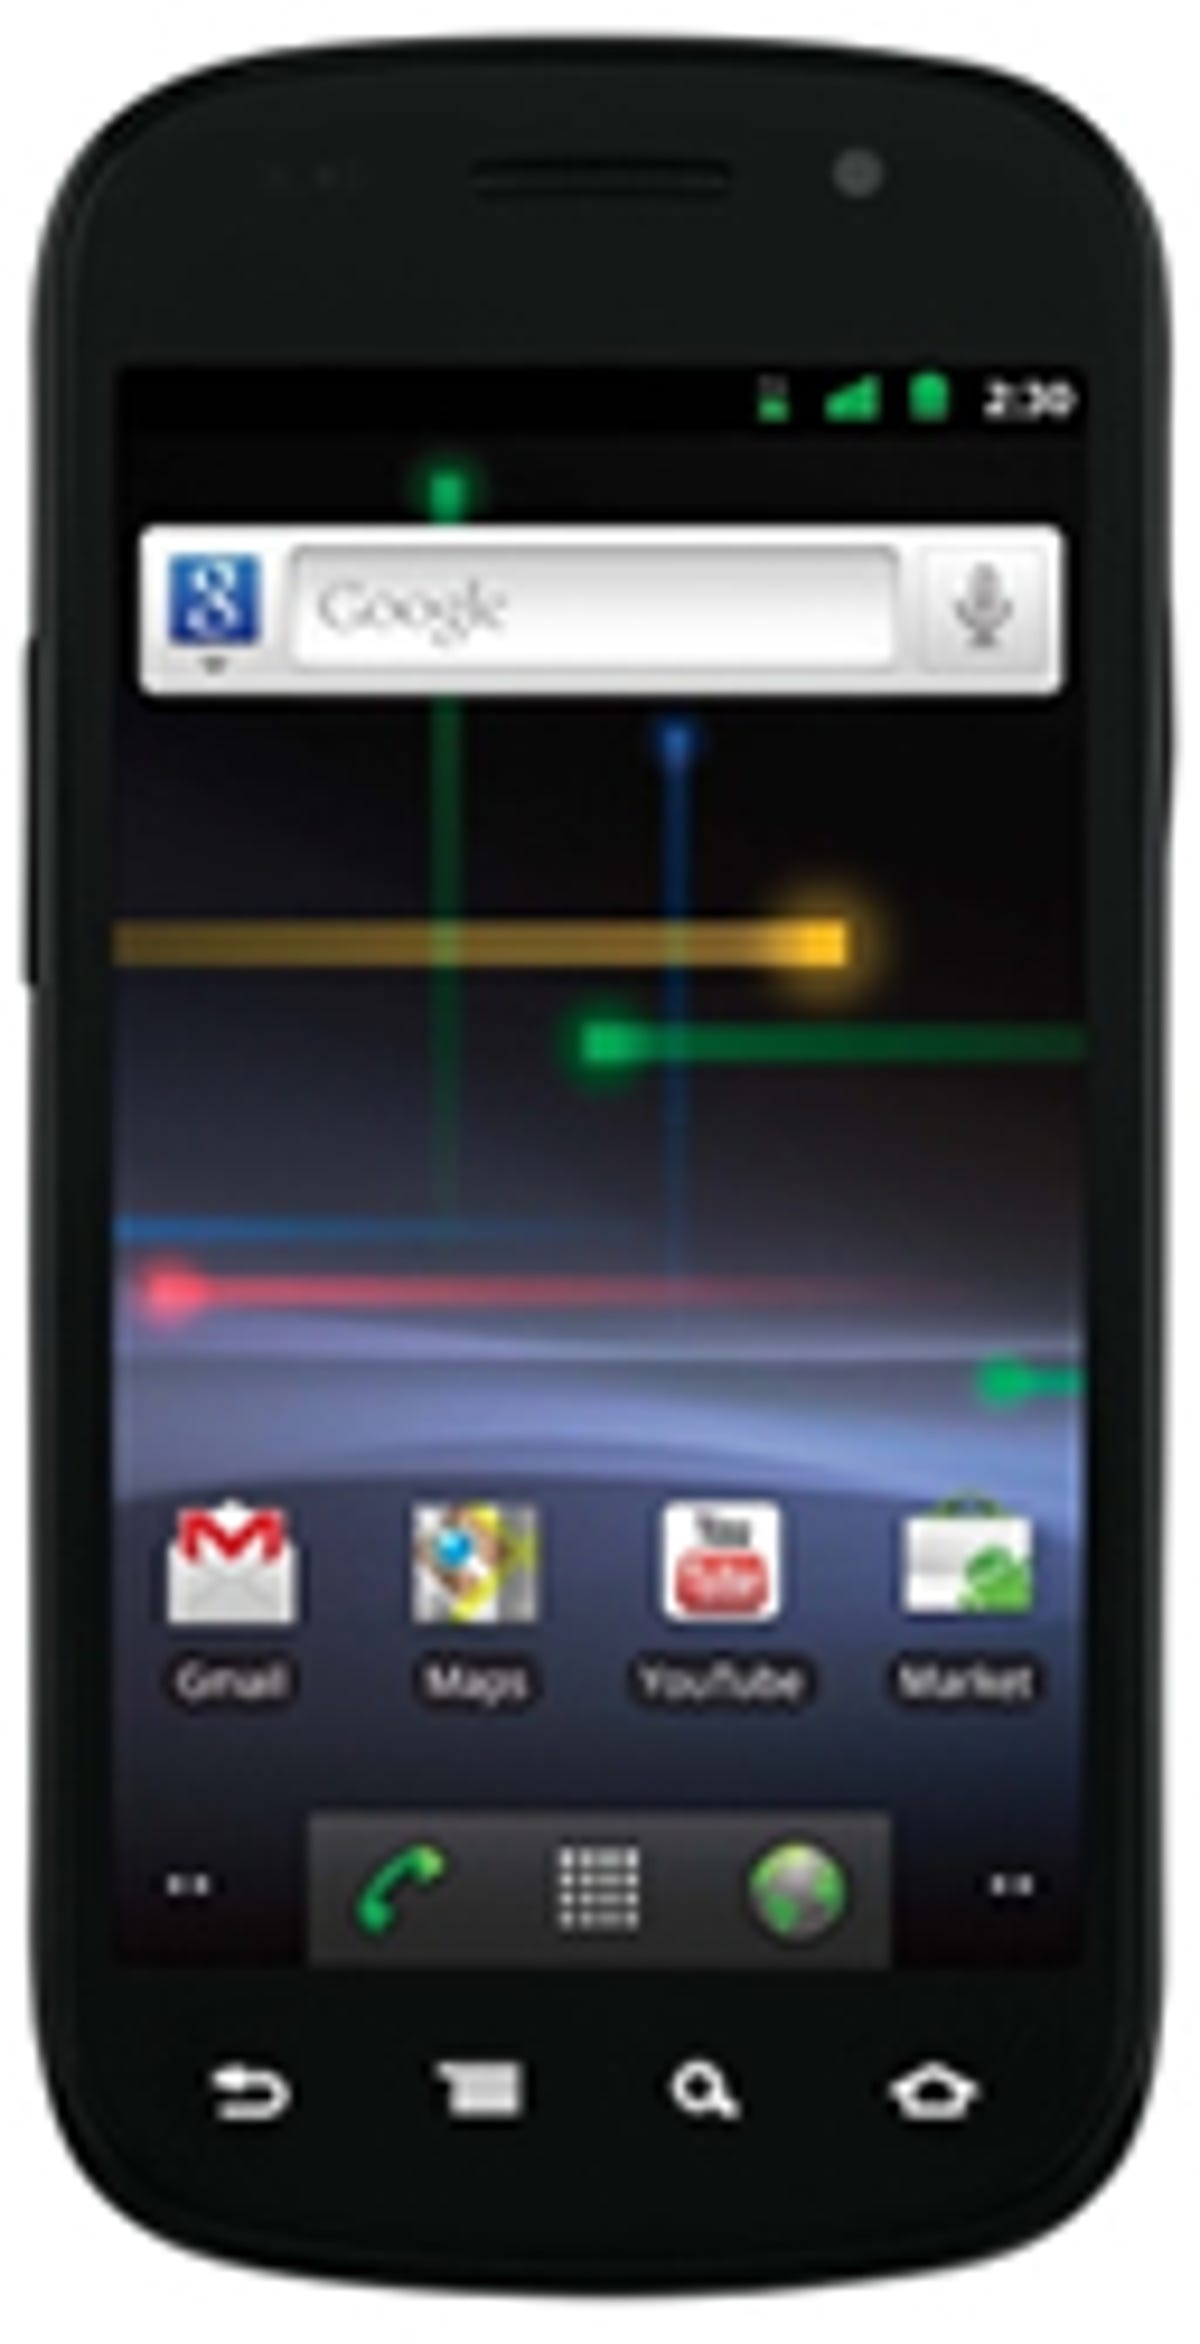 Google's Nexus S Android phone is equipped with near-field communications (NFC) technology.